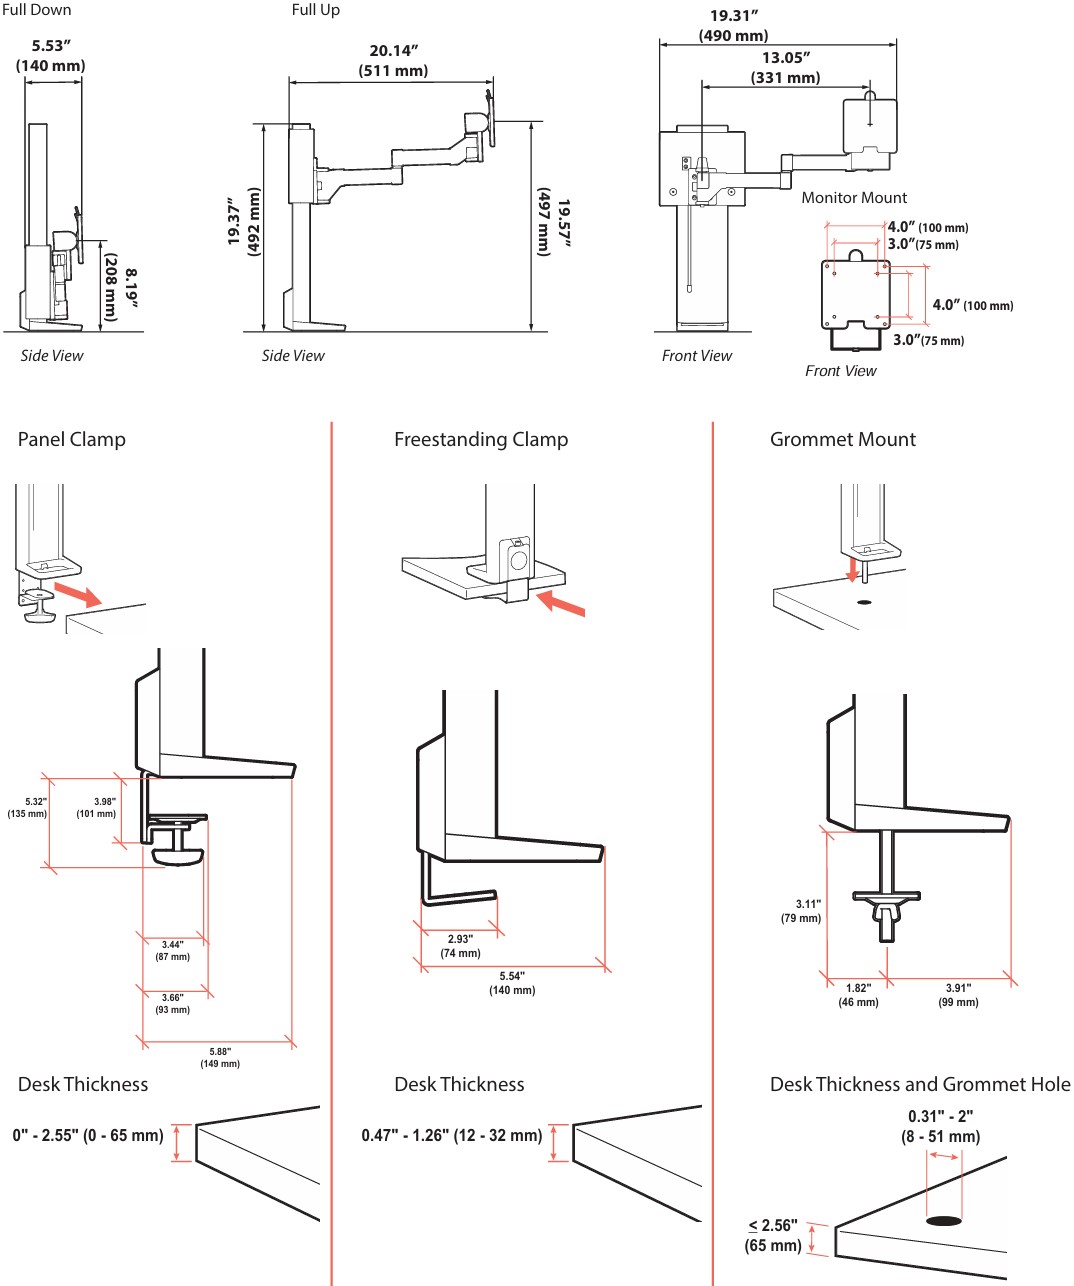 Technical Drawing for 
Ergotron TDS-MA-GR-251 TRACE Monitor Mount with Grommet Clamp (white)